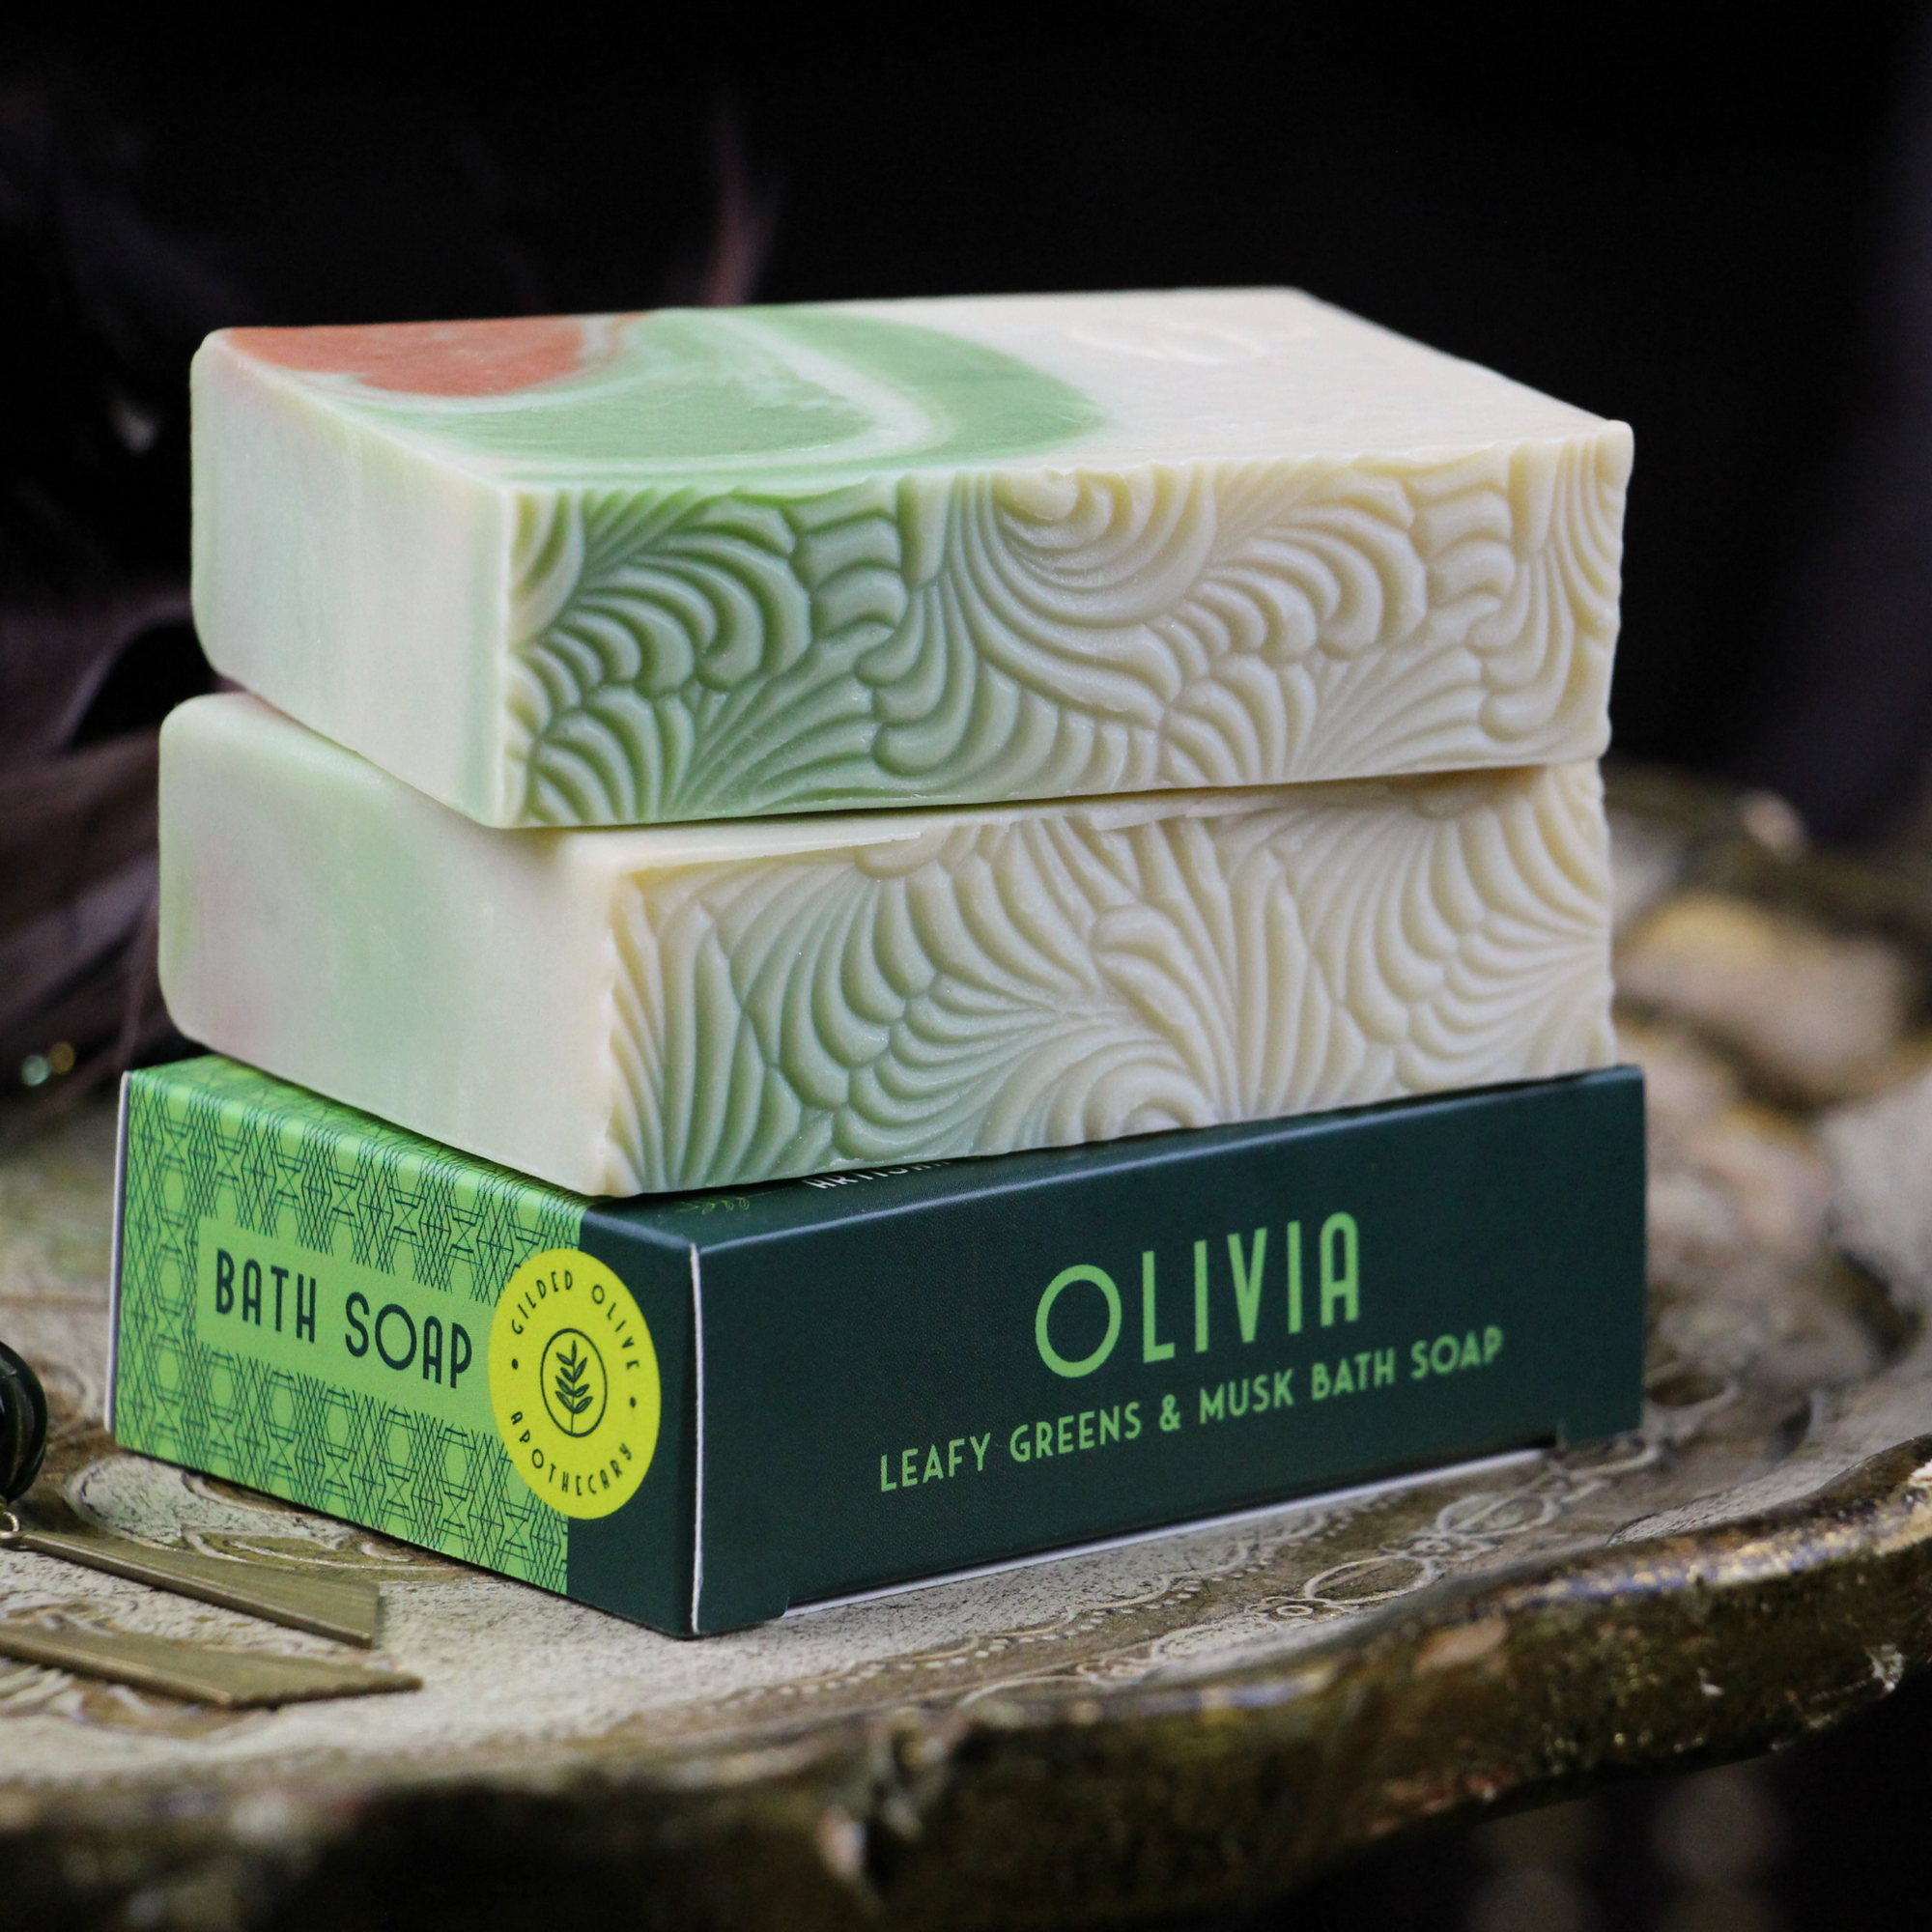 Olivia Leafy Greens & Musk Bath Soap | Gilded Olive Apothecary